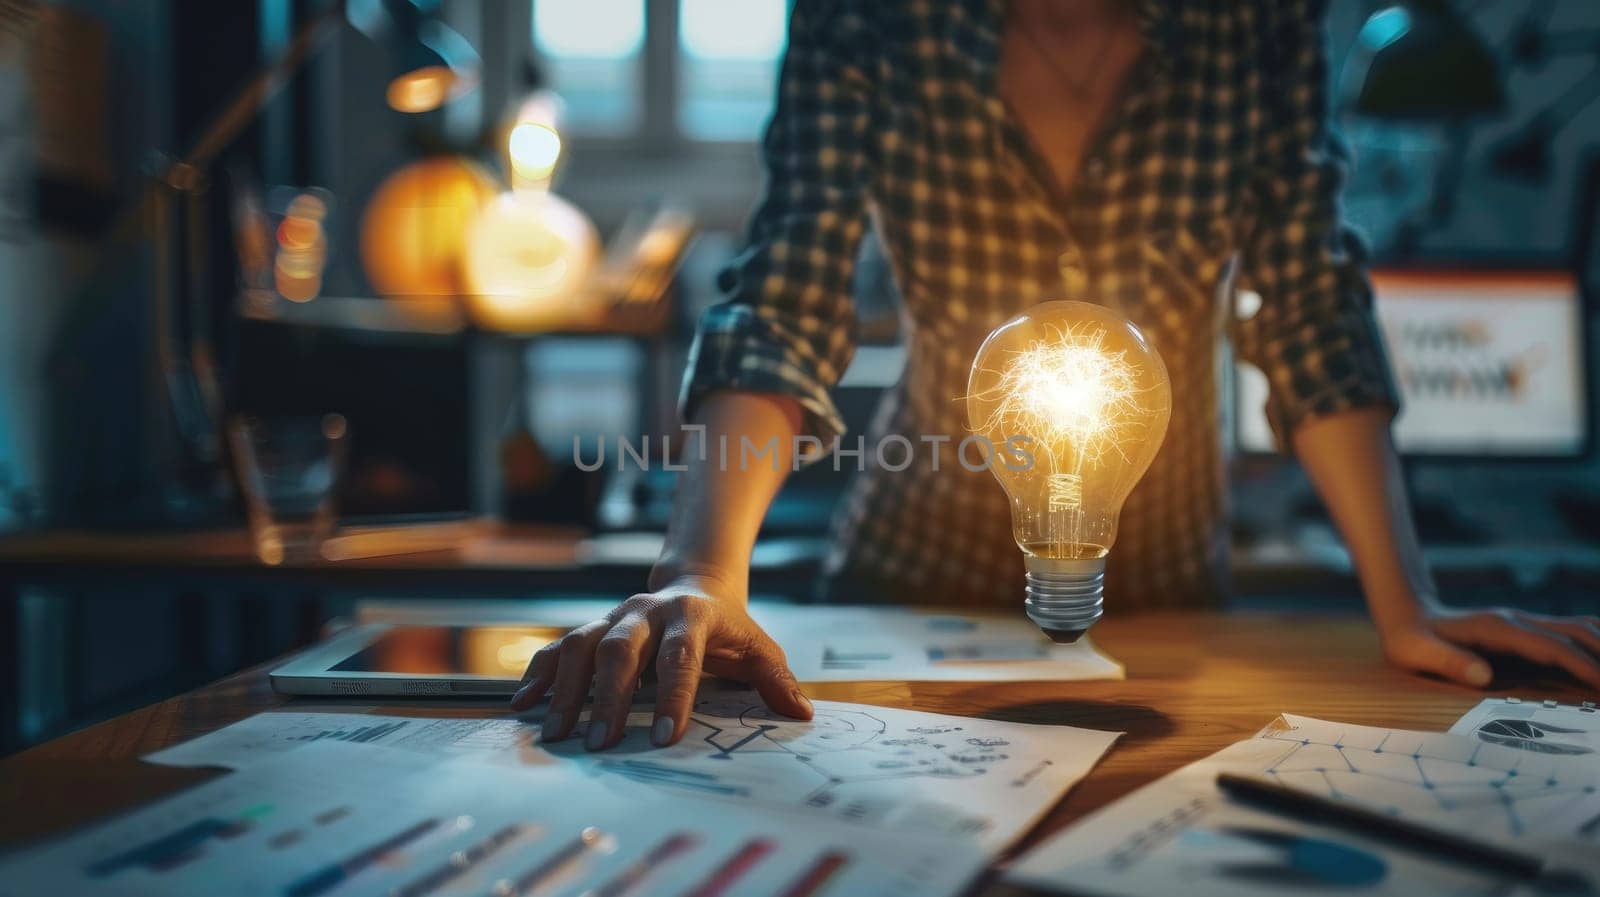 A woman is standing in front of a desk with a light bulb on top of a paper. The scene suggests a creative and innovative atmosphere